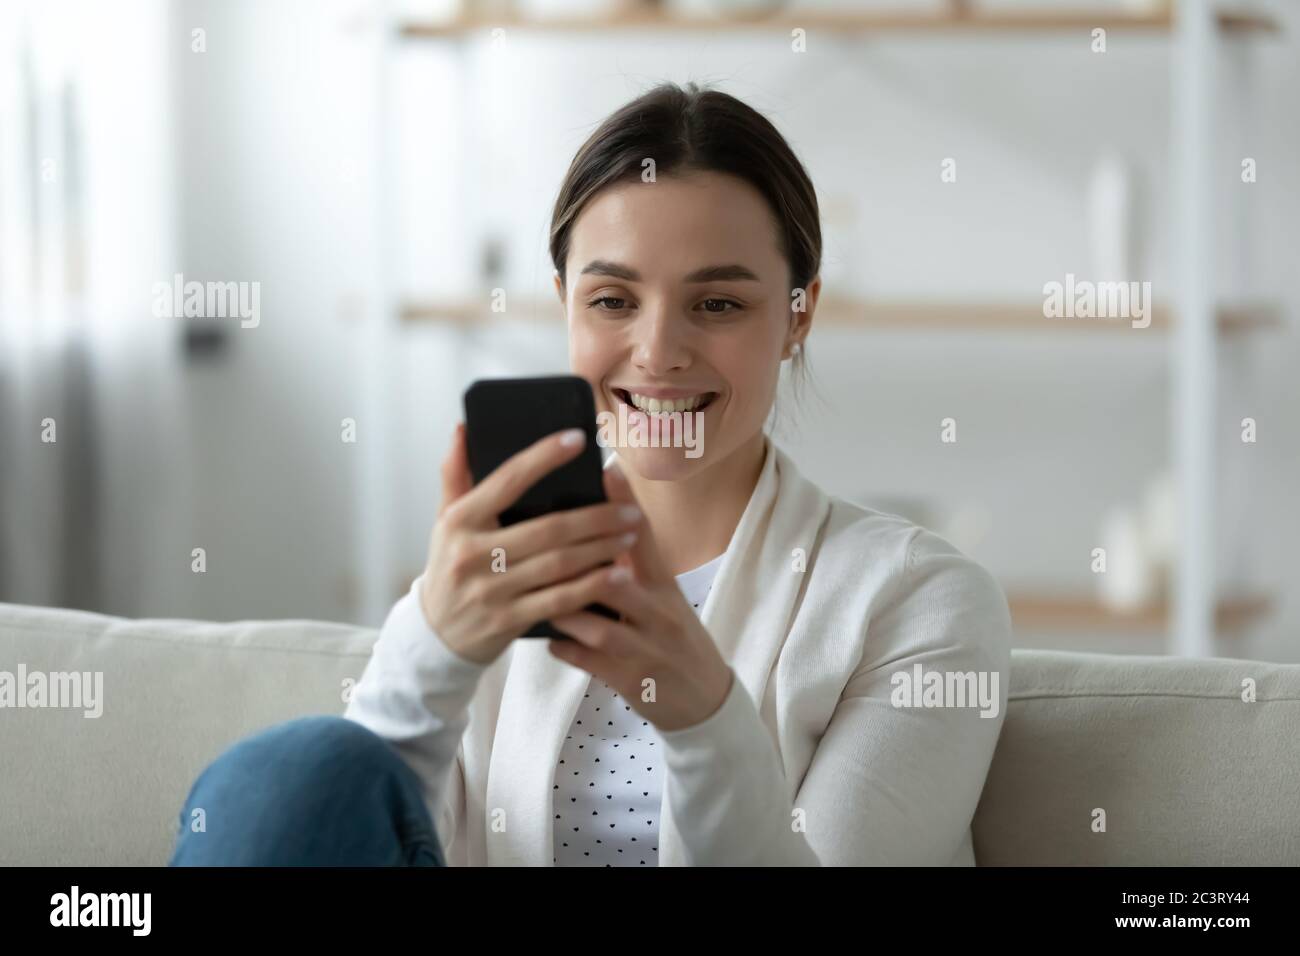 Smiling woman holding mobile phone dialing number, makes videocall Stock Photo